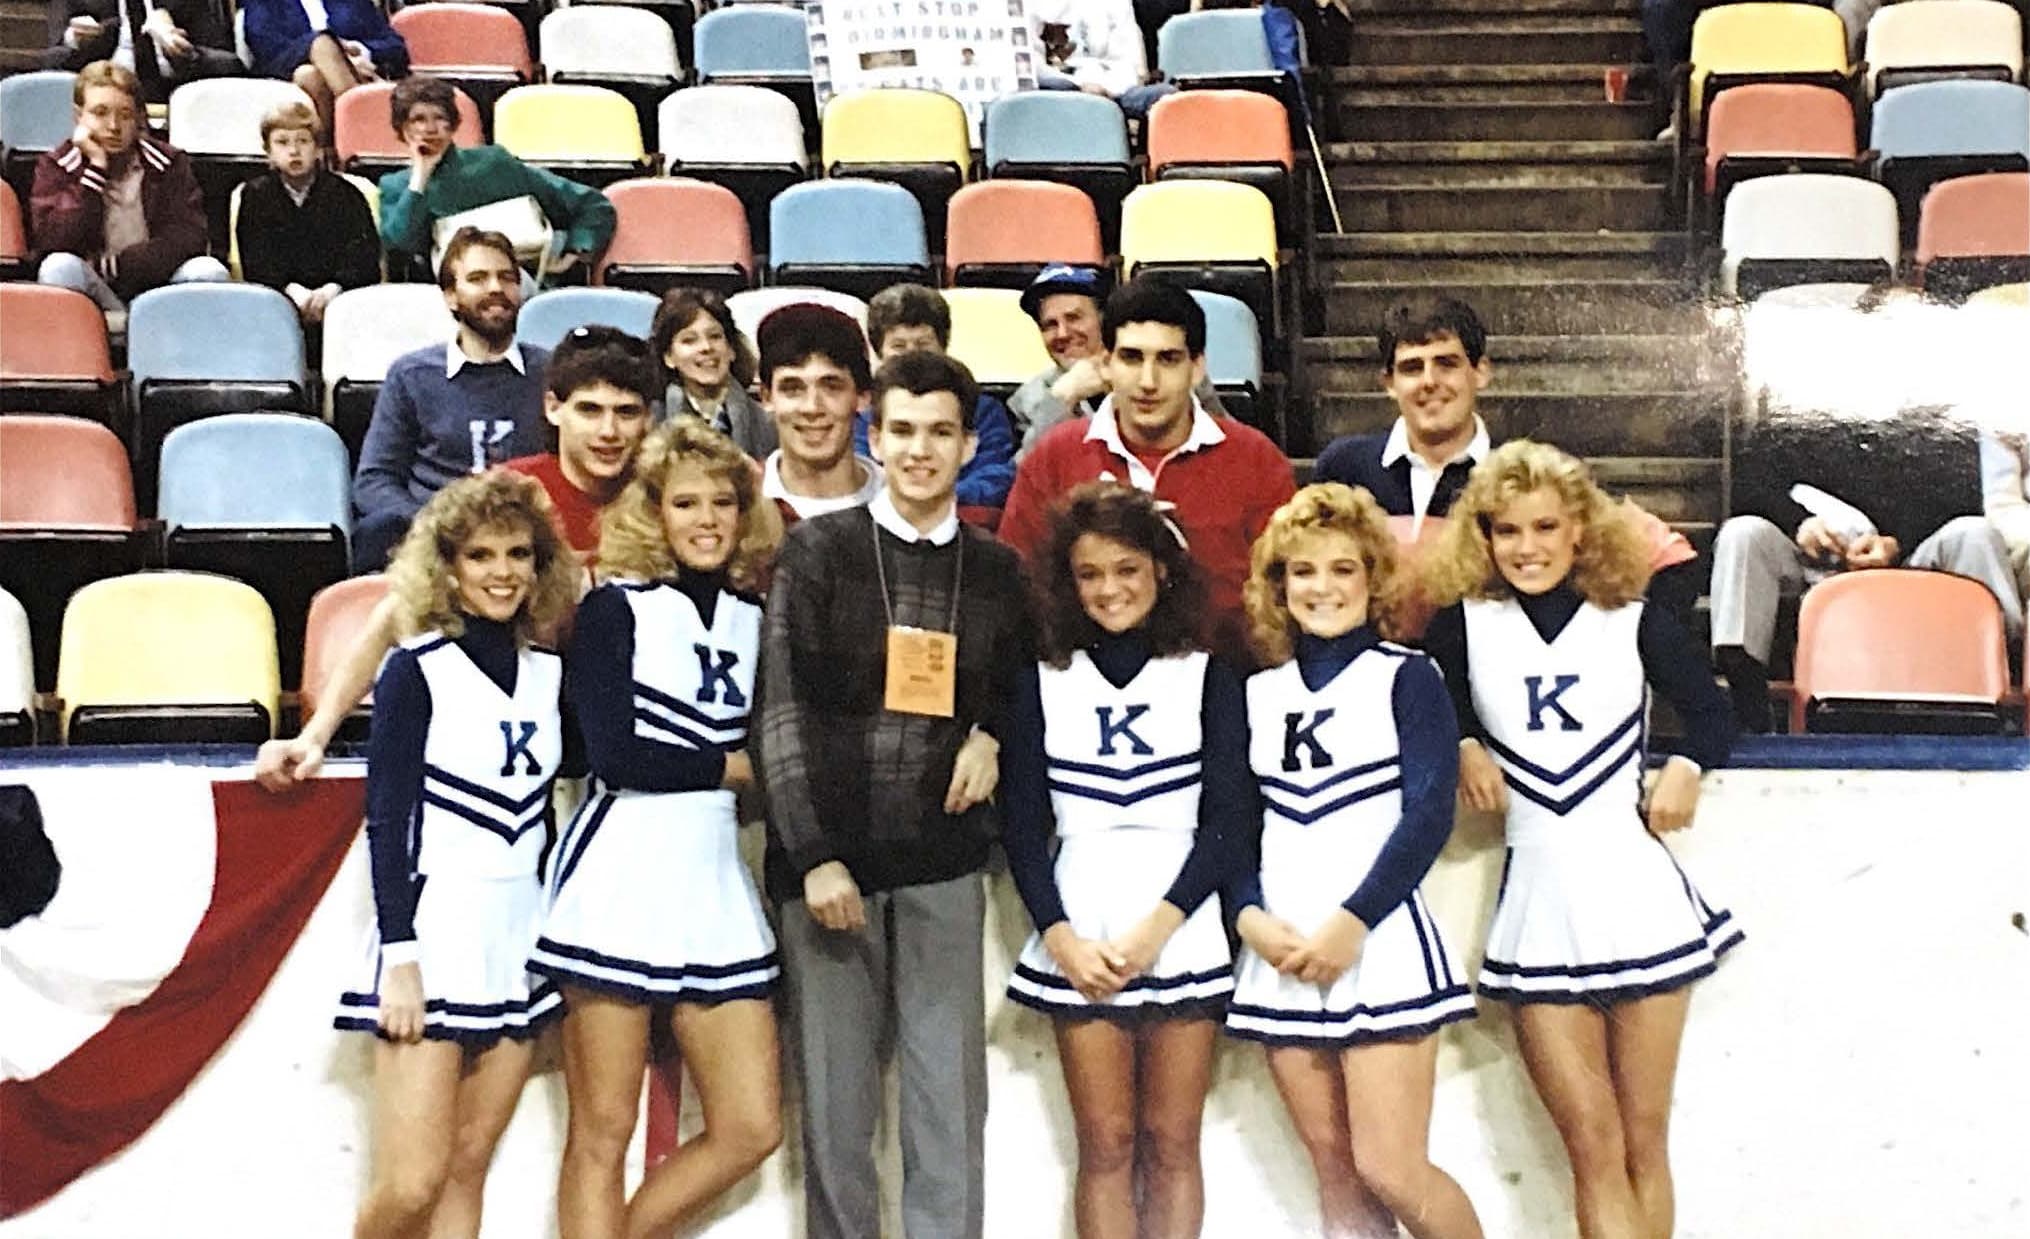 Jim Perrus, center, with a group of cheerleaders at the 1988 NCAA Tournament